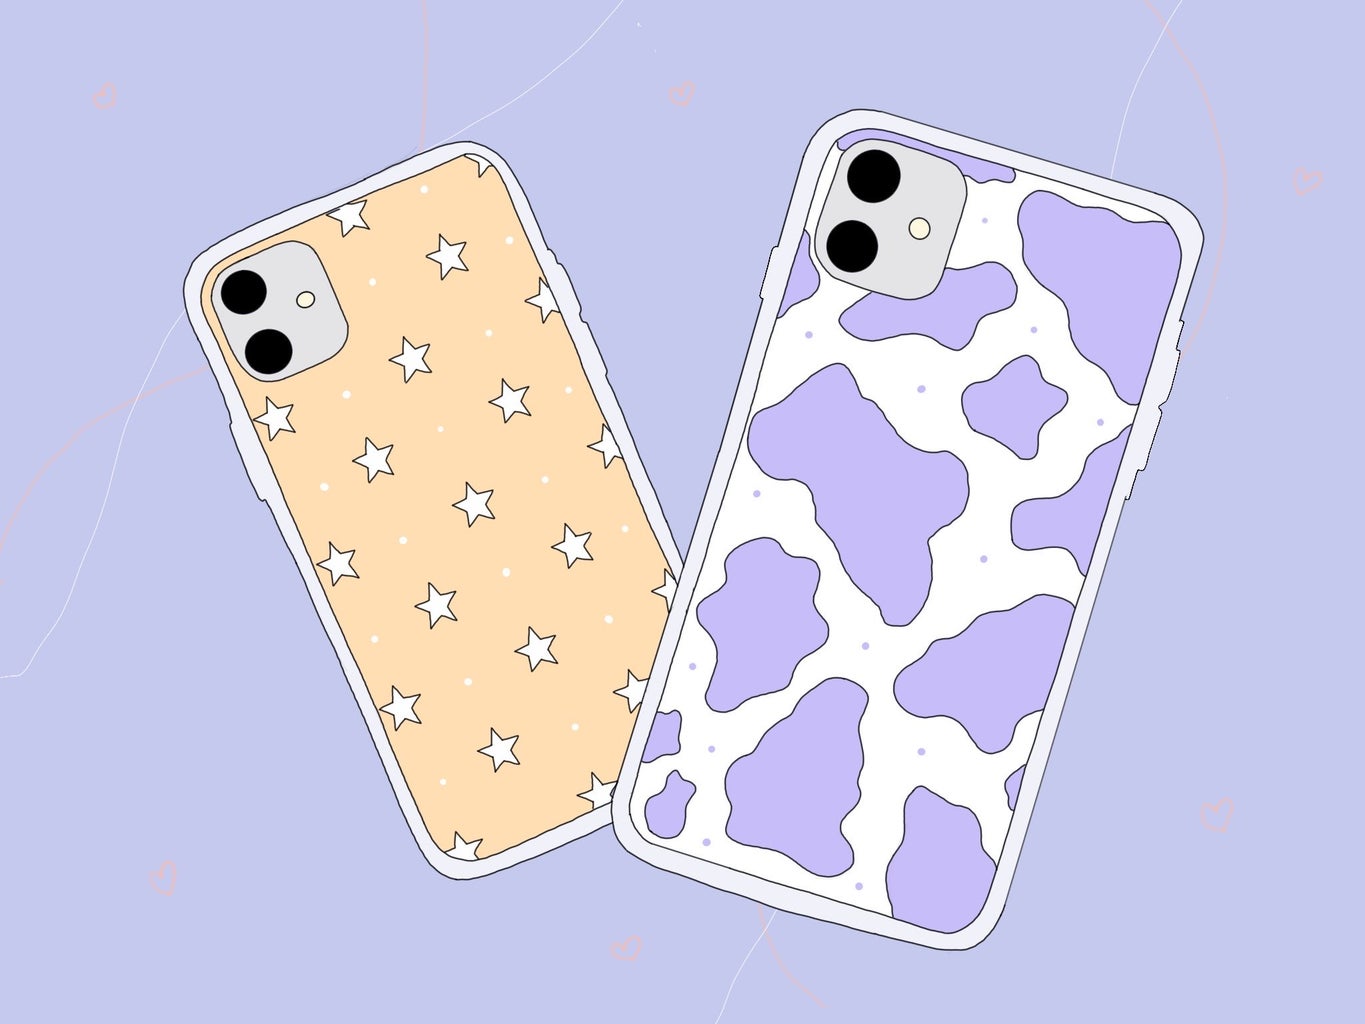 Phones with cases